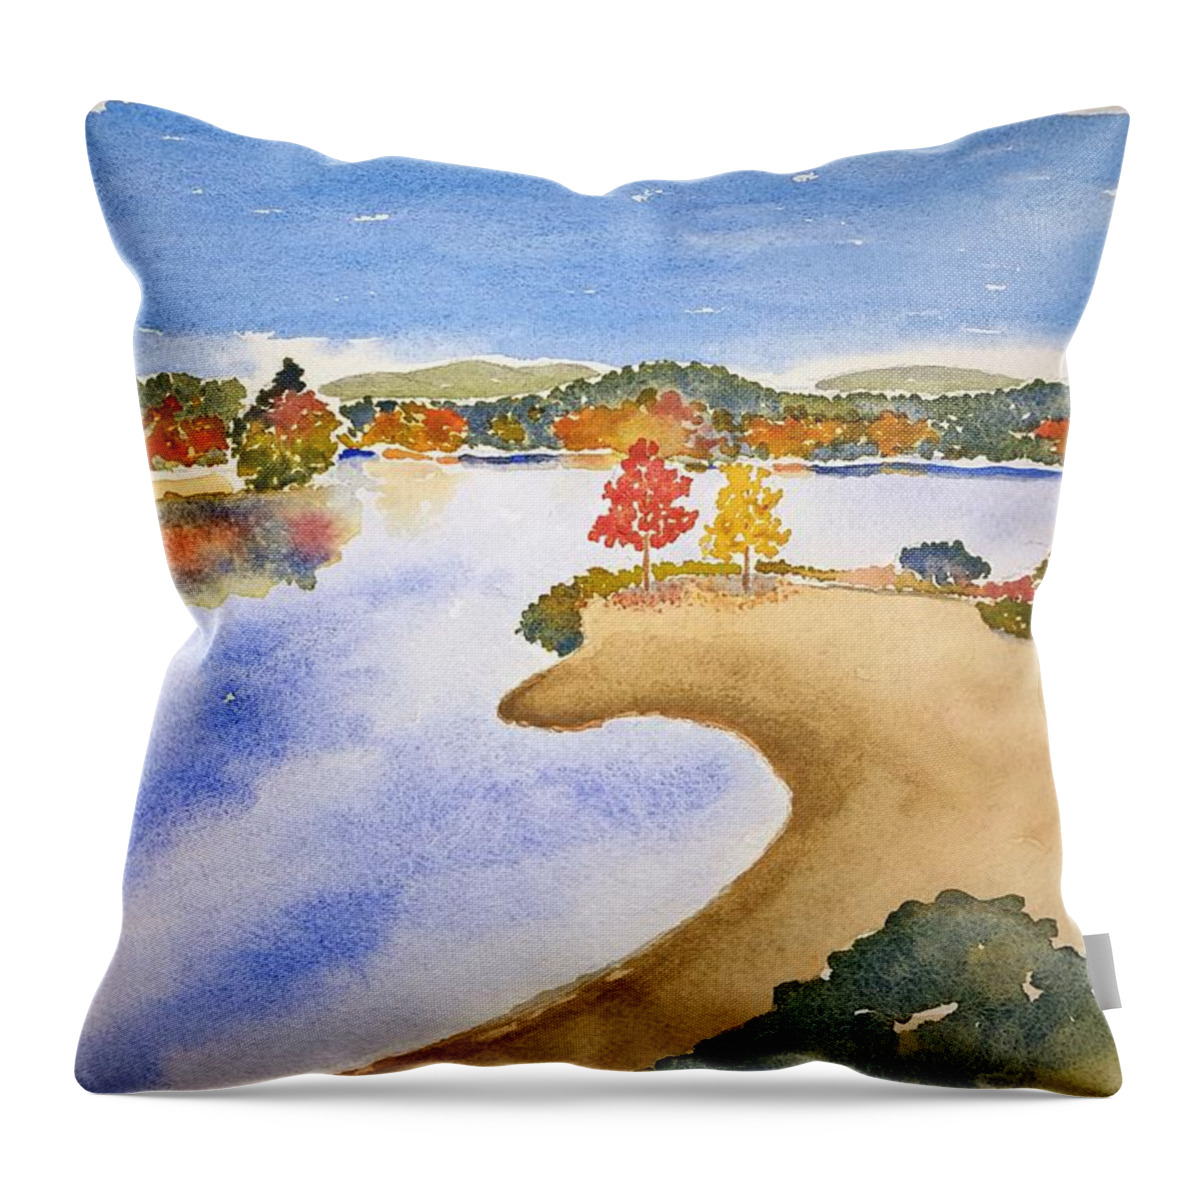 Watercolor Throw Pillow featuring the painting Autumn Shore Lore by John Klobucher